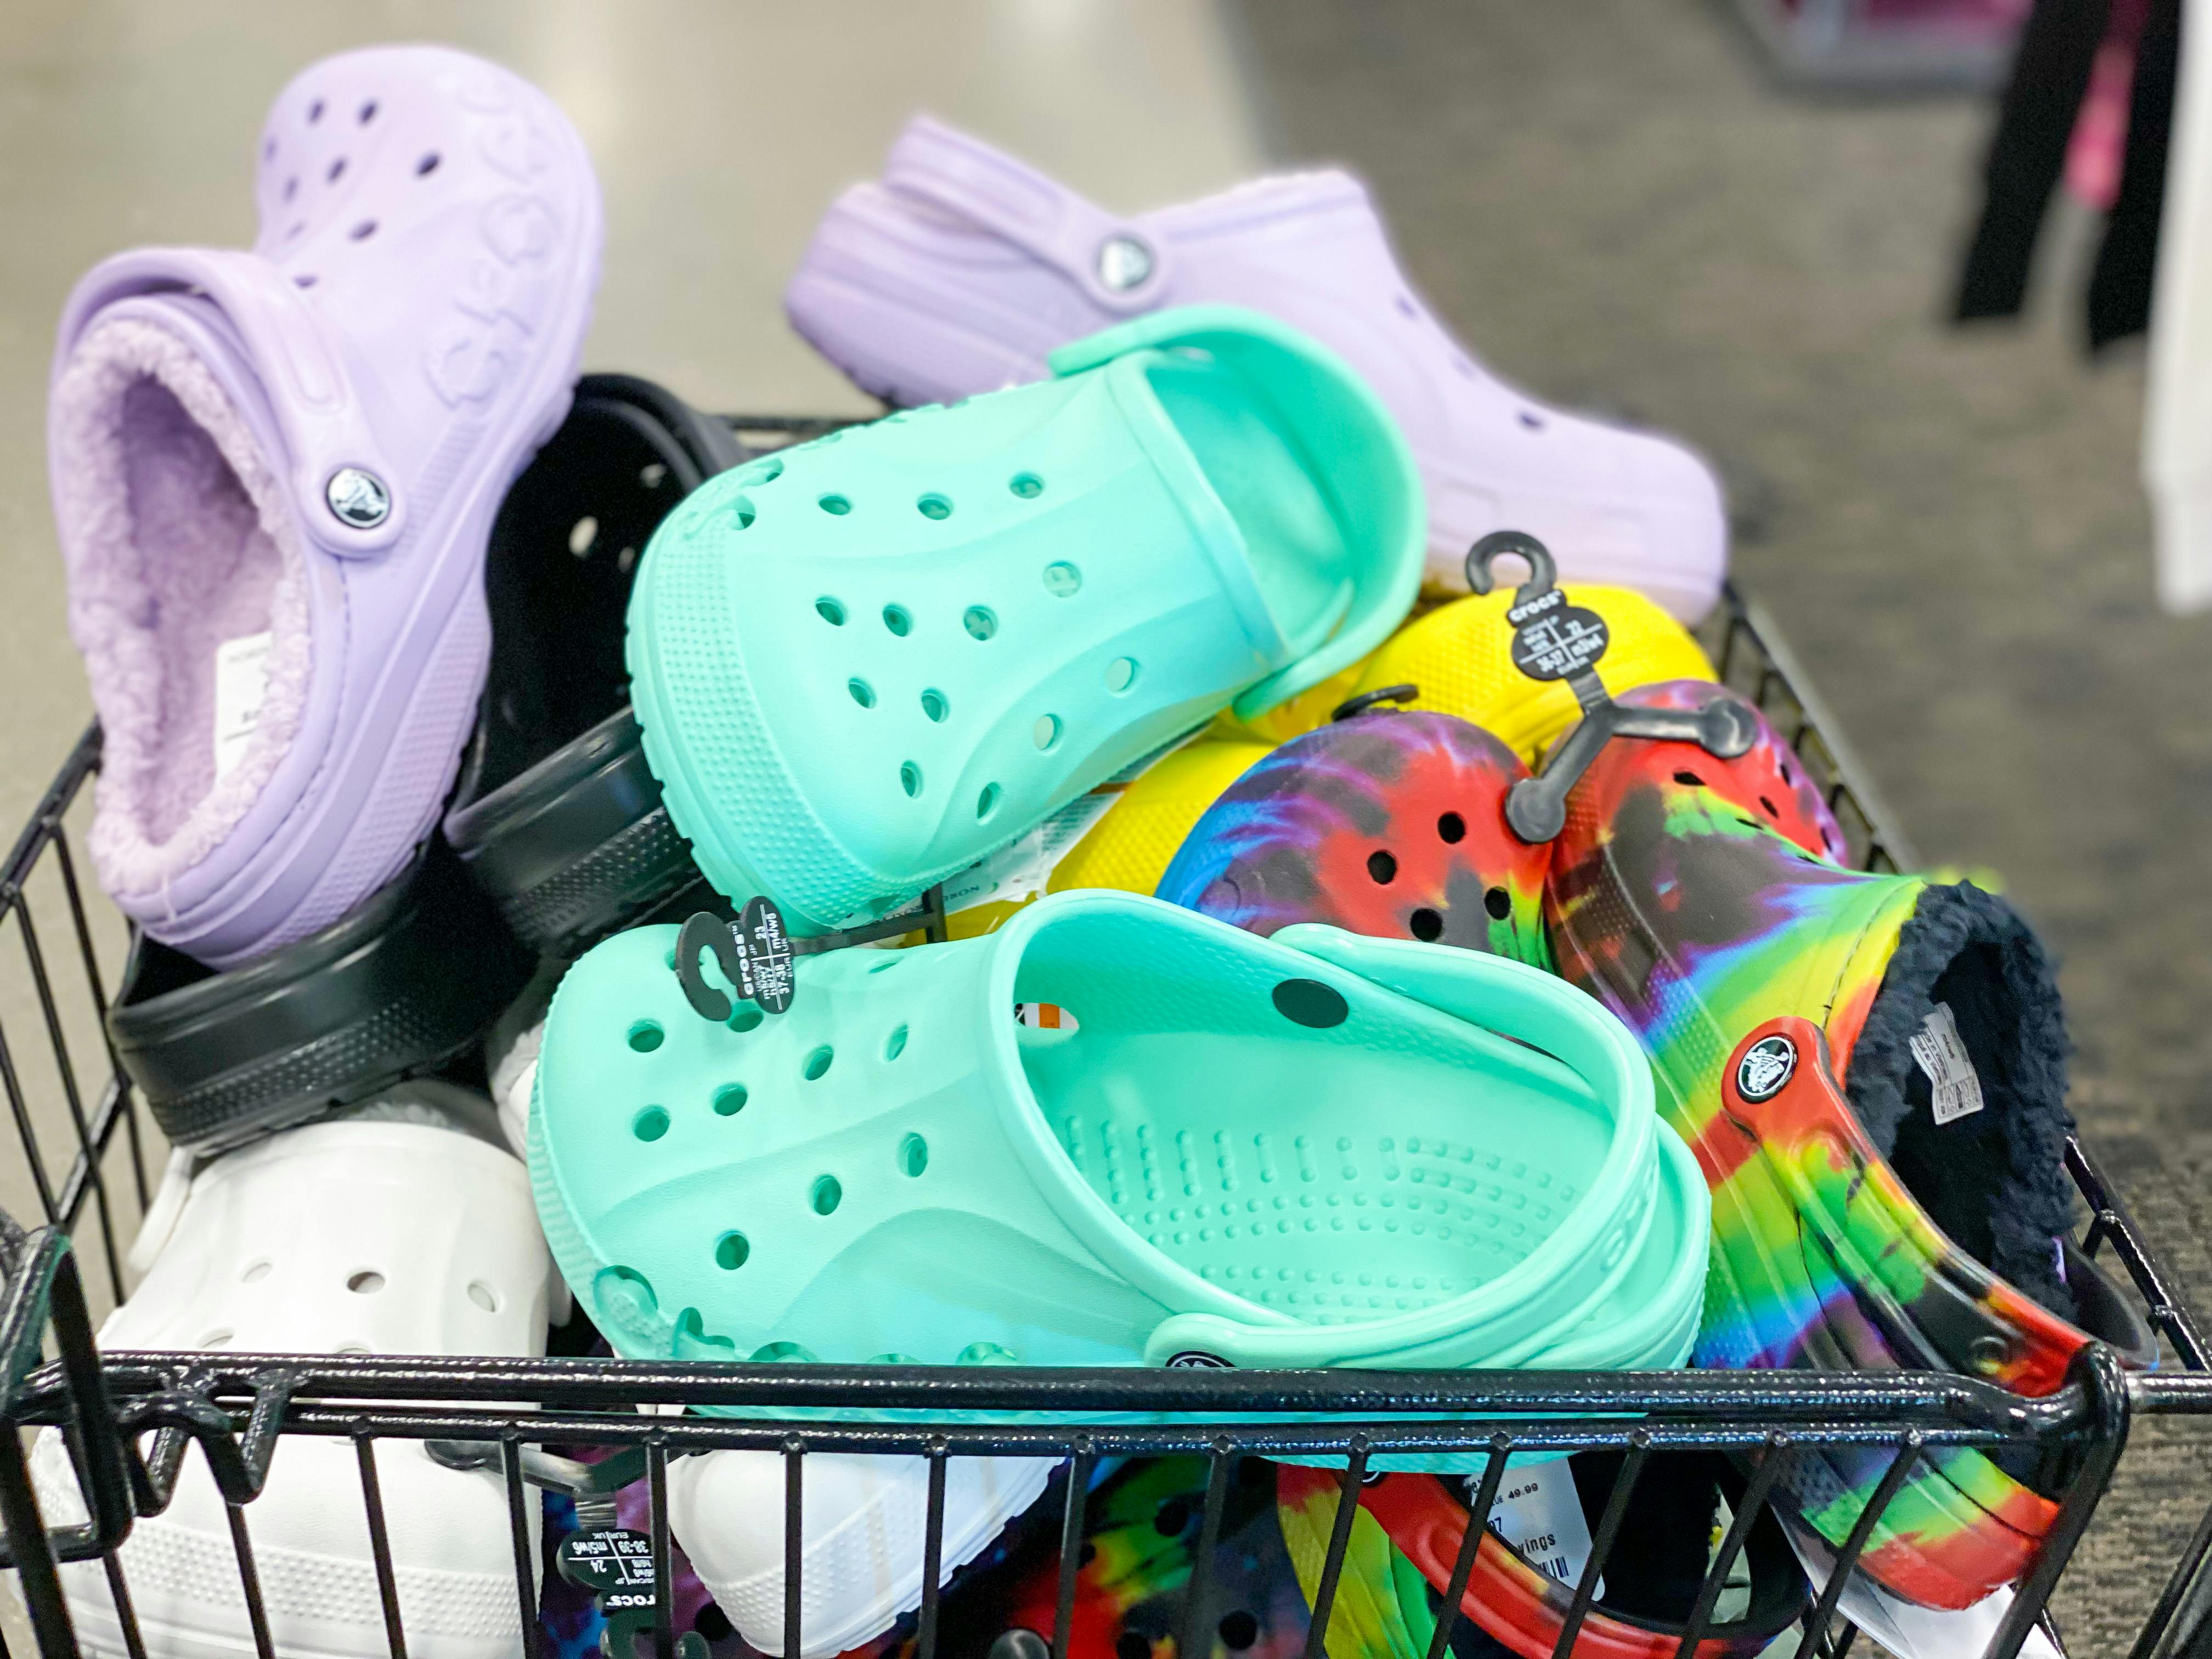 21 Ways to Score the Cheapest Crocs - The Krazy Coupon